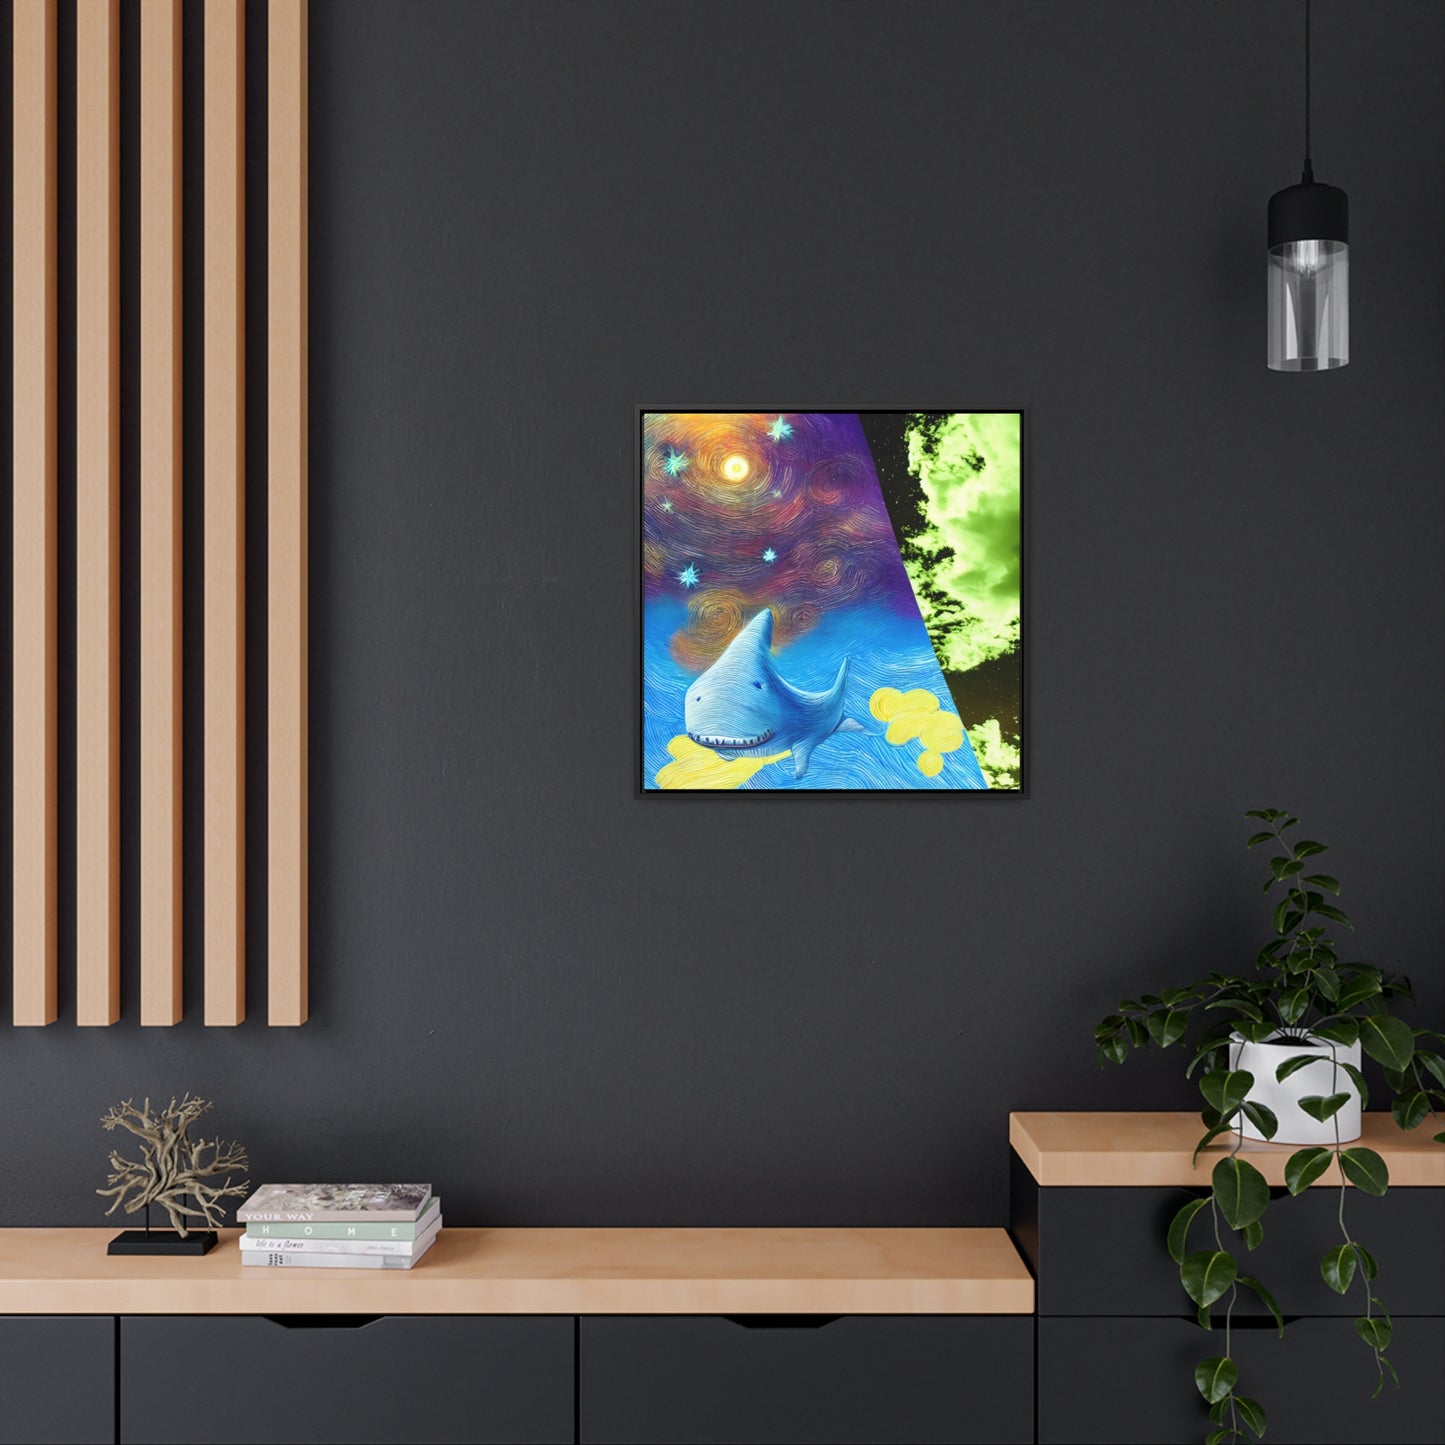 Whale In The Clouds - Framed Gallery Canvas